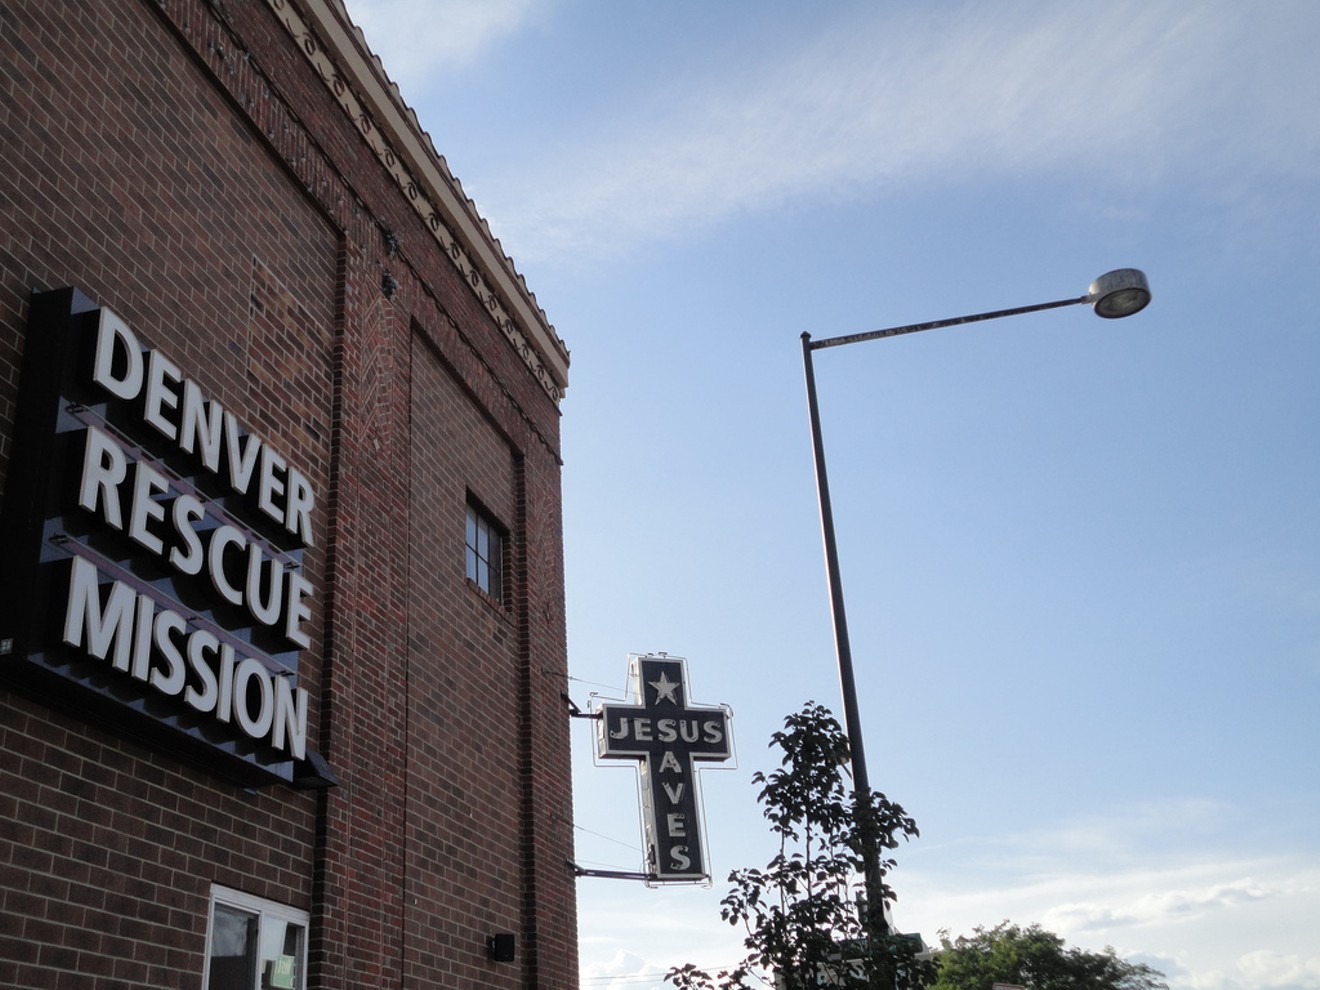 Denver Rescue Mission has walked back the discriminatory policies in an employee handbook.